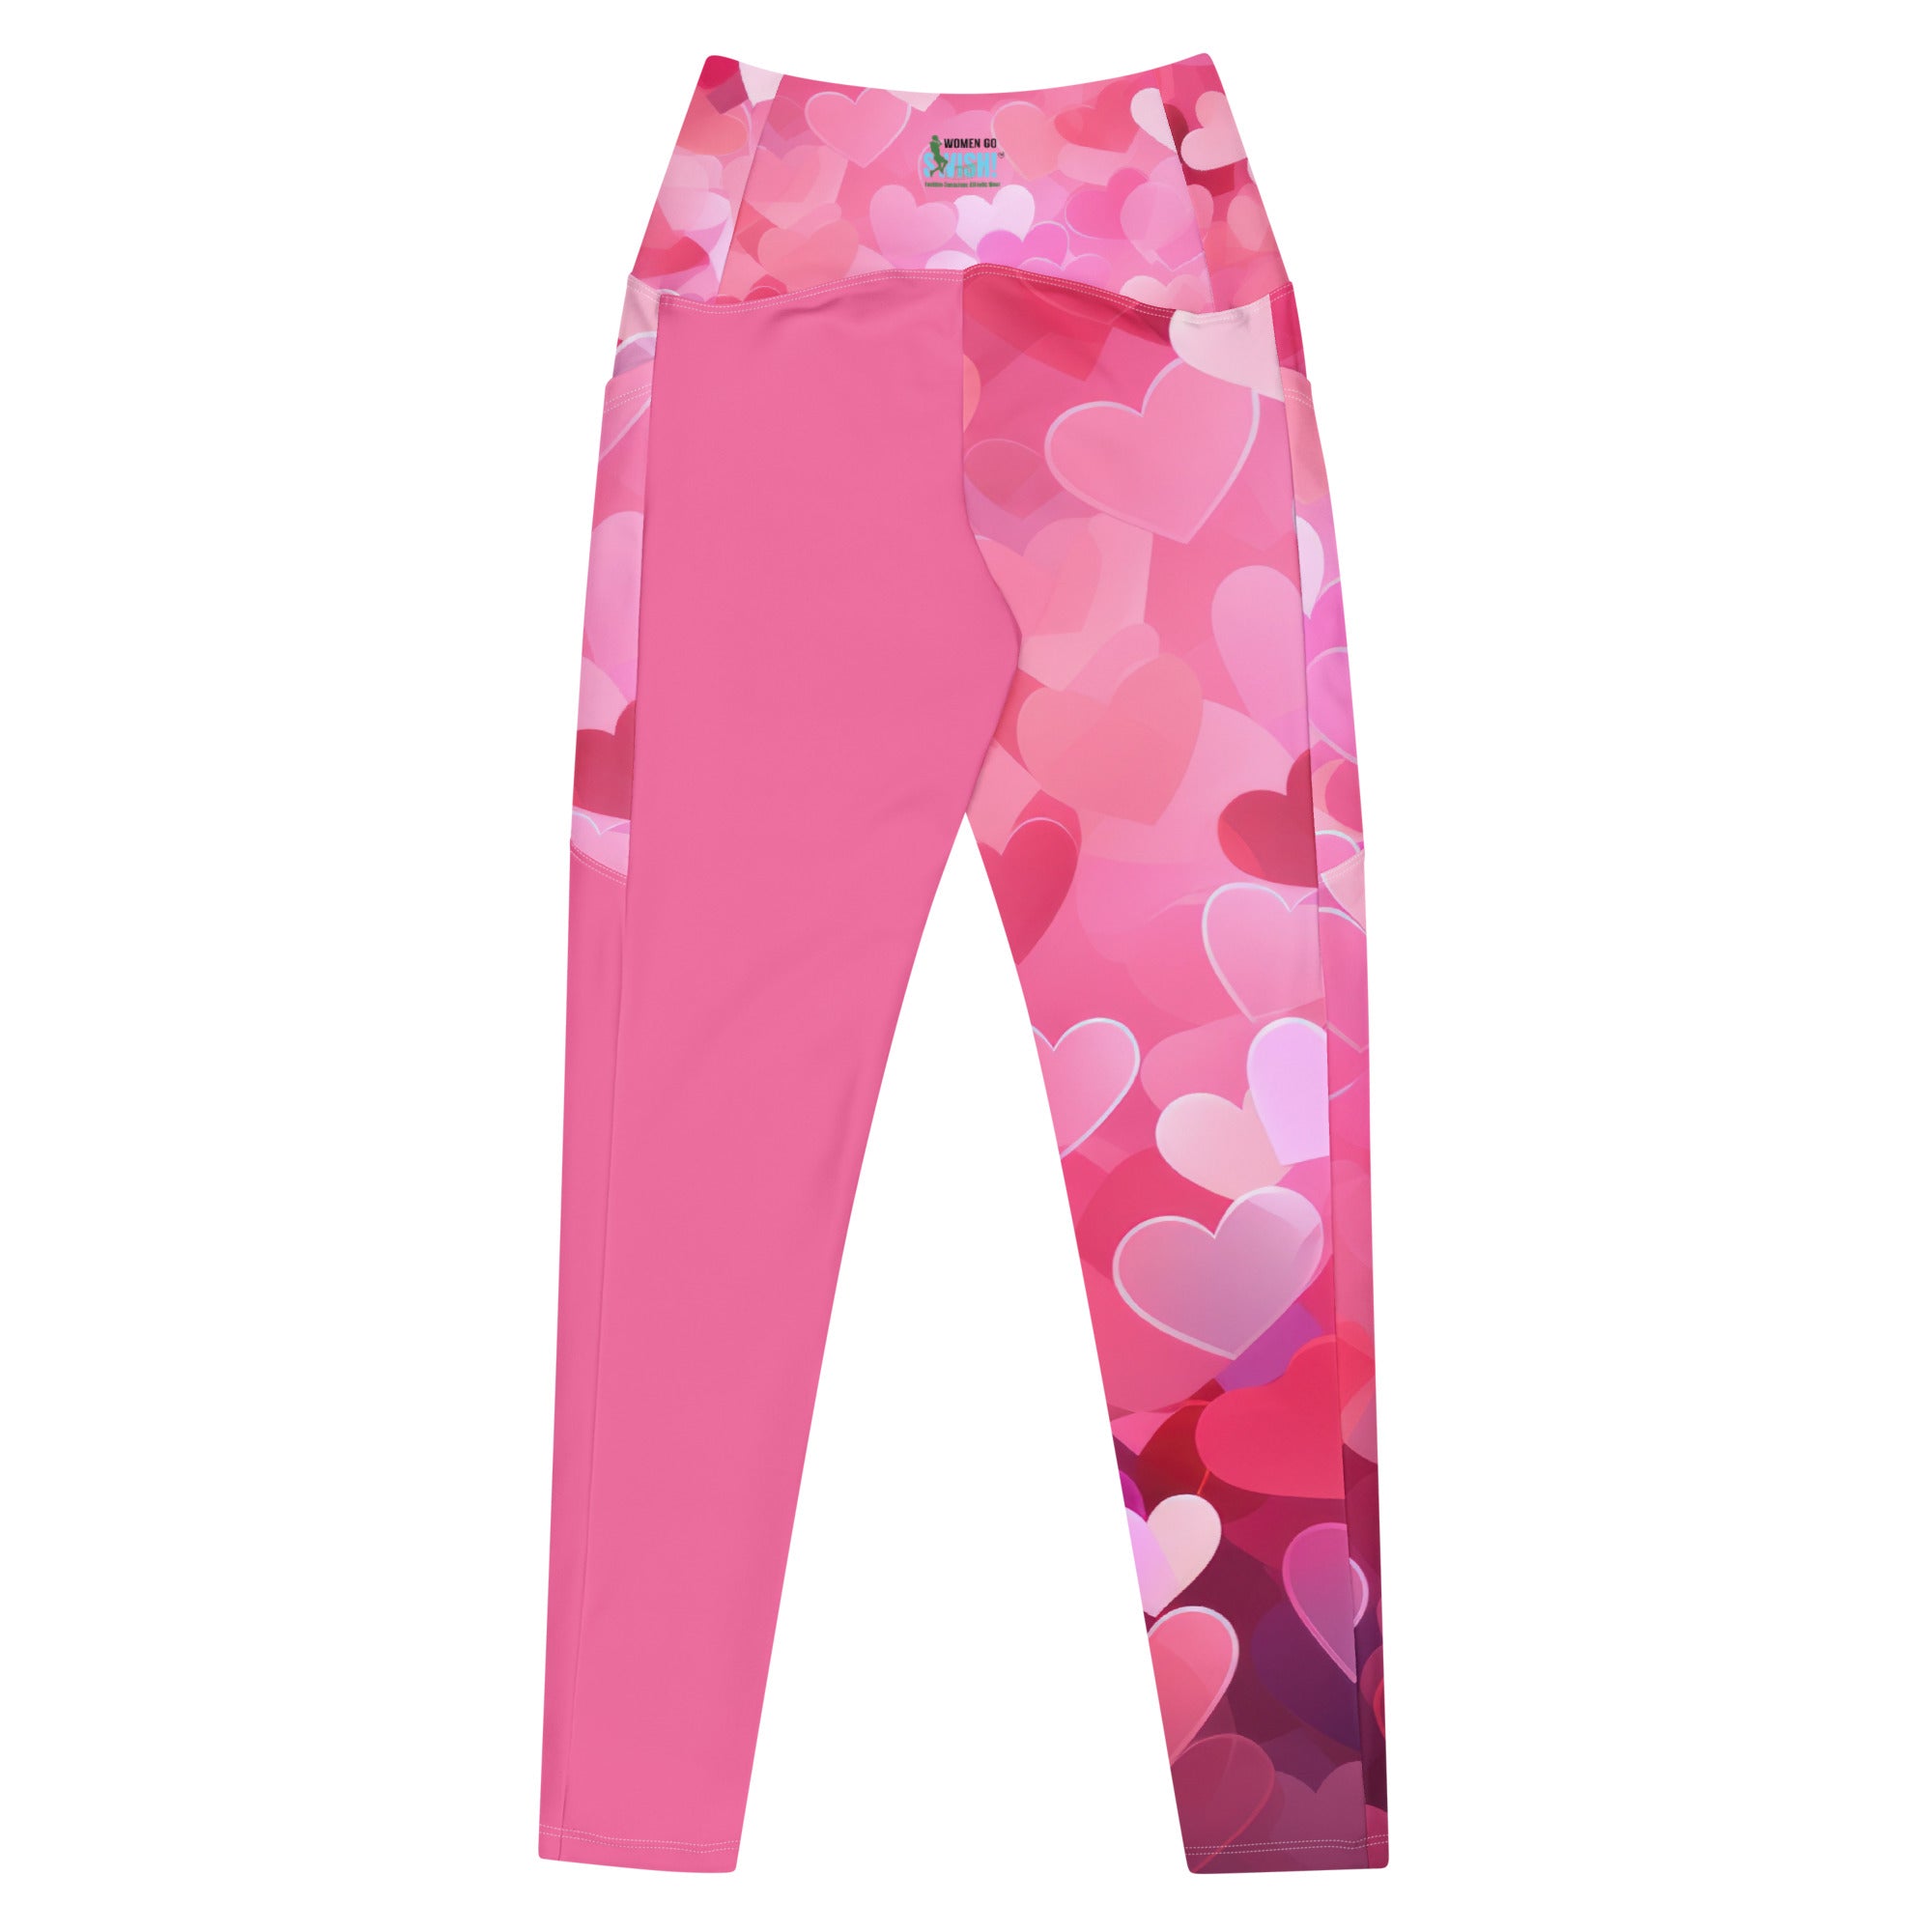 "I Love Women's Sports" Multi-pink Leggings with Pockets